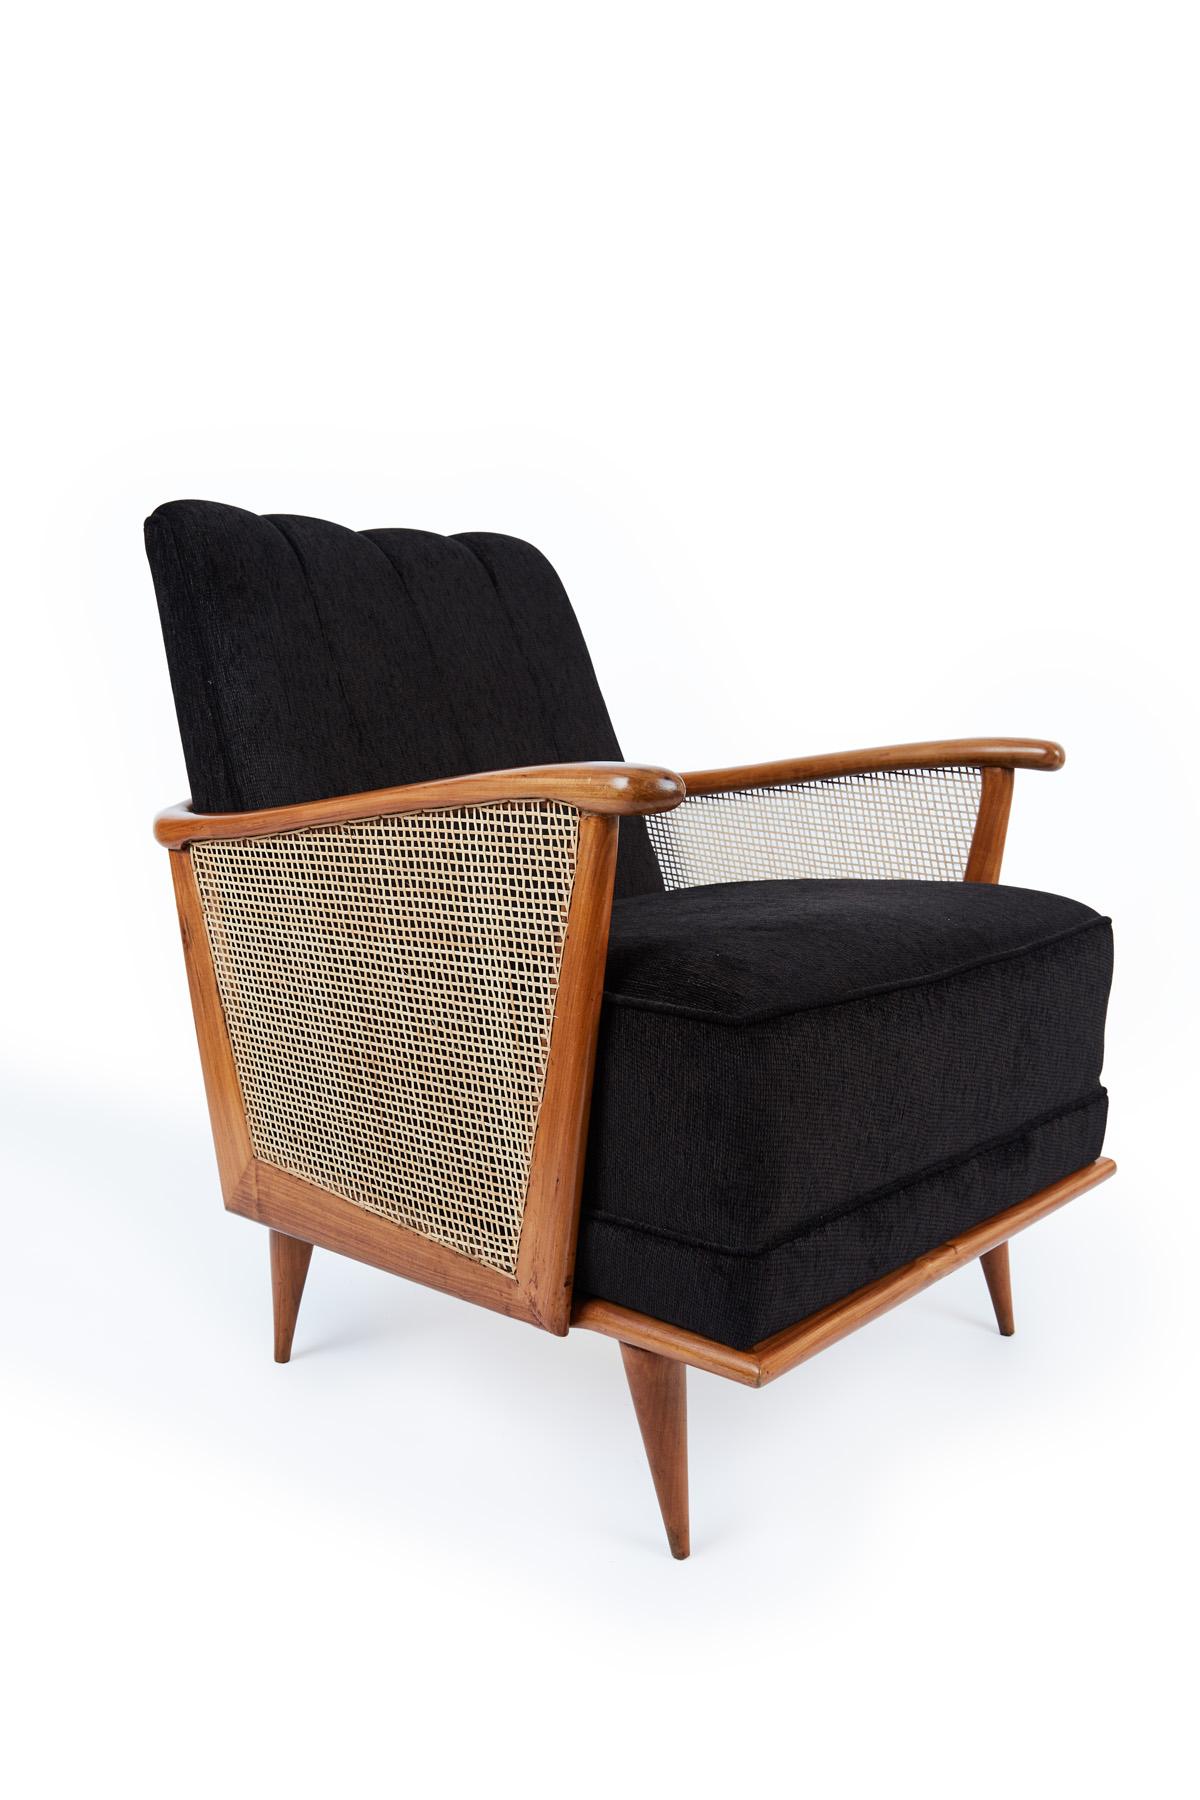 Pair of armchairs in Caviuna wood and fabric, 1950s
Measures: H 80 x W 64 x D 72 cm.